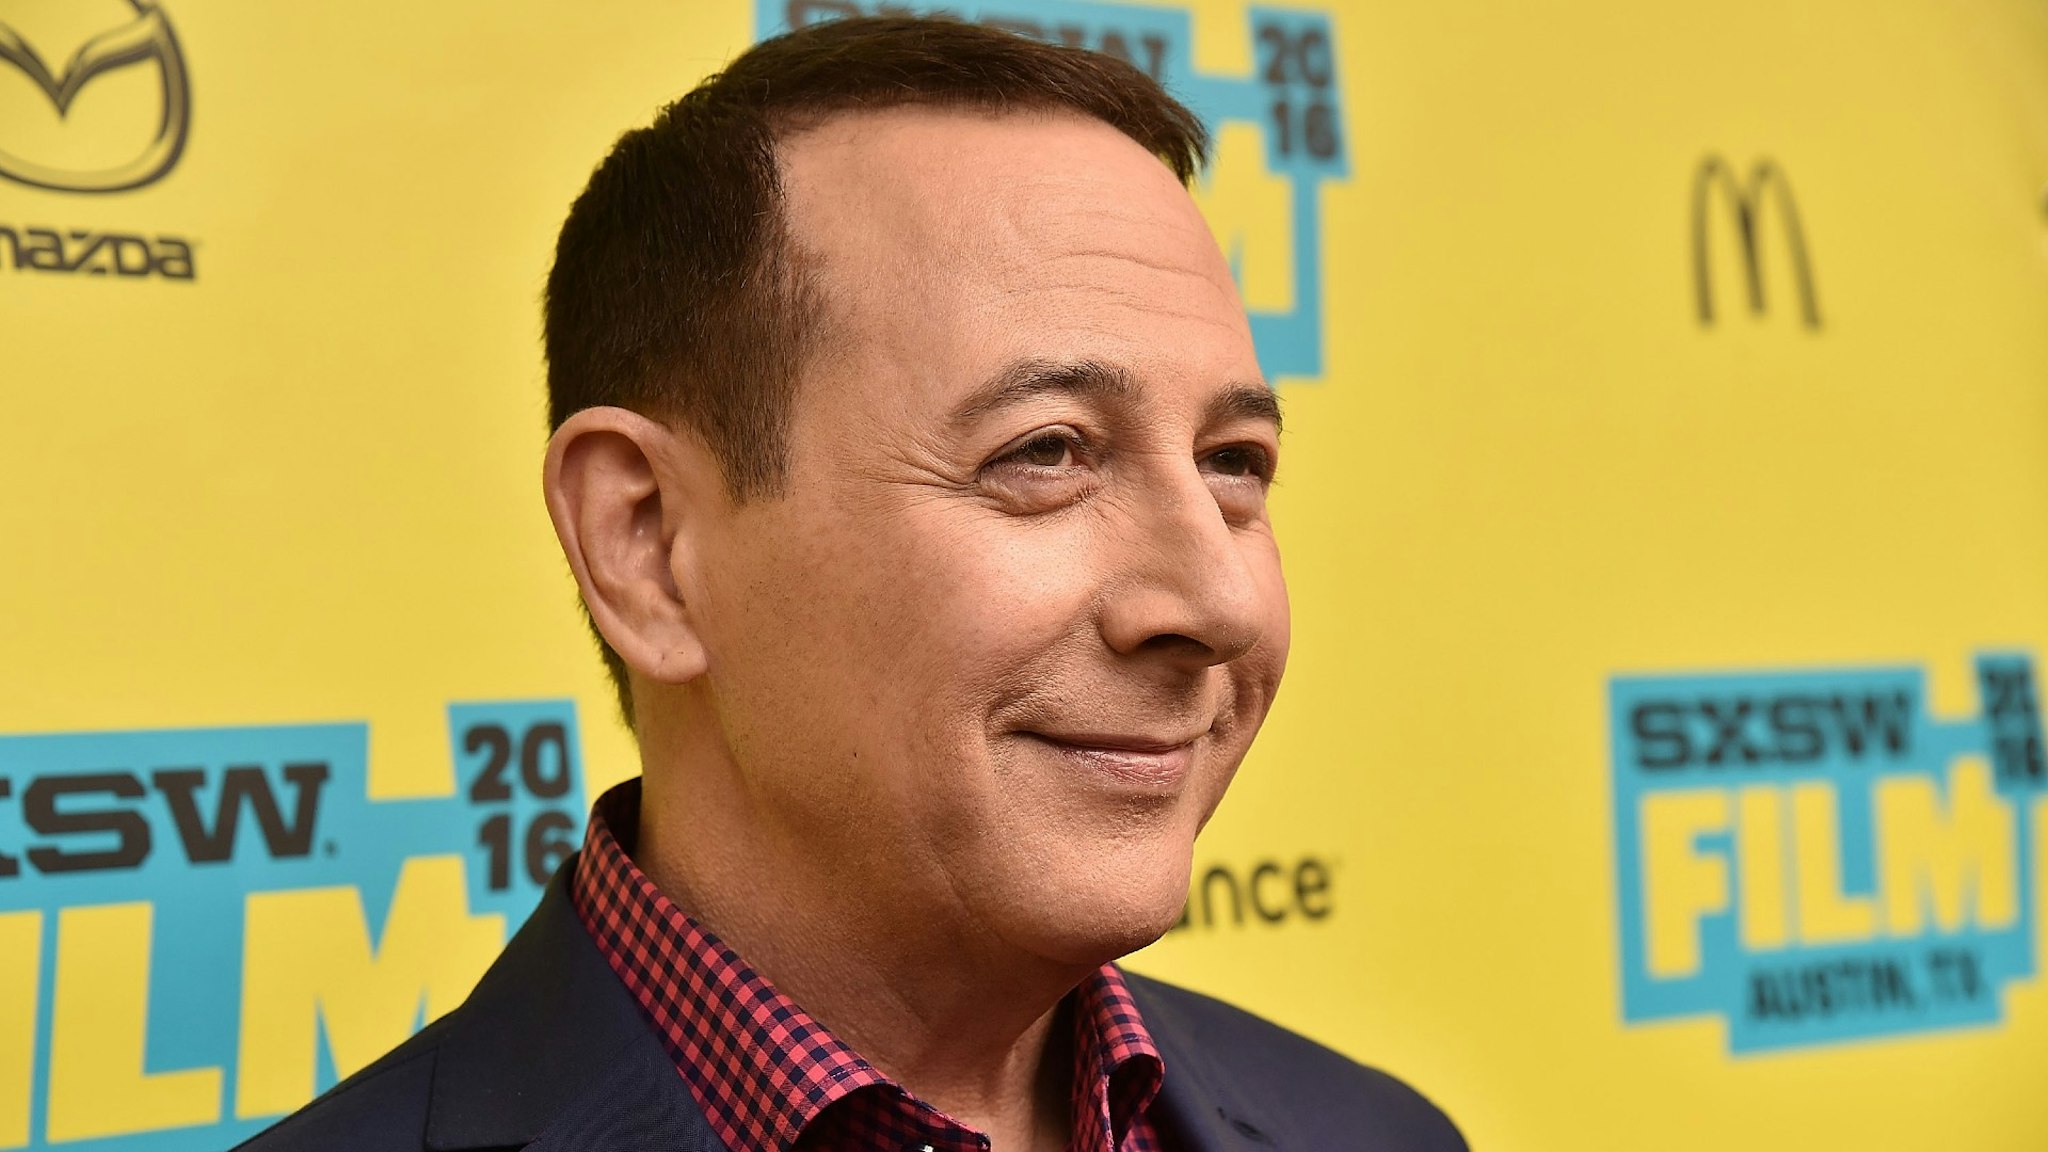 Actor Paul Reubens attends the premiere of "Pee-wee's Big Holiday" during the 2016 SXSW Music, Film + Interactive Festival at Paramount Theatre on March 17, 2016 in Austin, Texas.